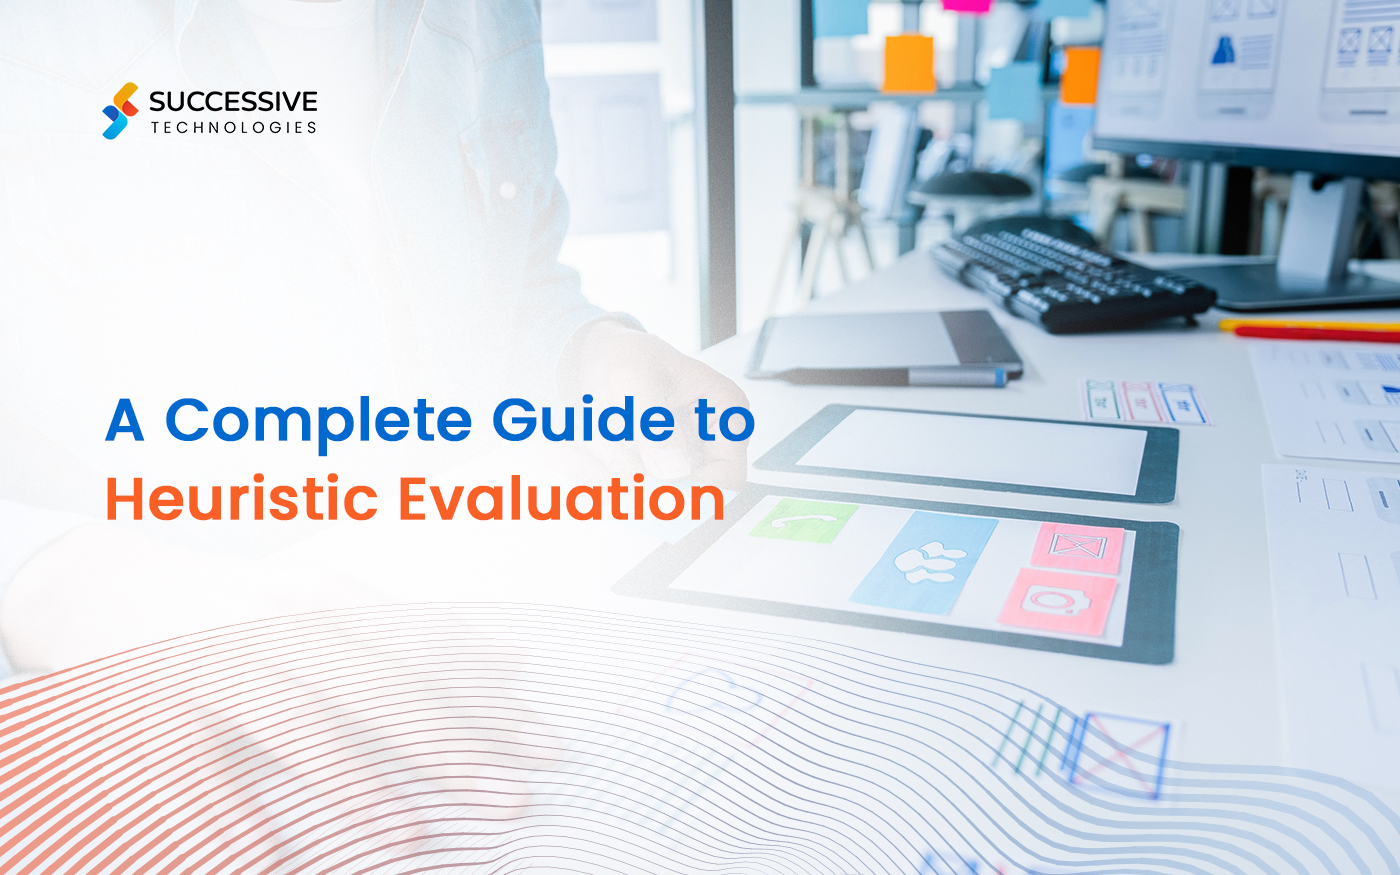 A Complete Guide to Heuristic Evaluation